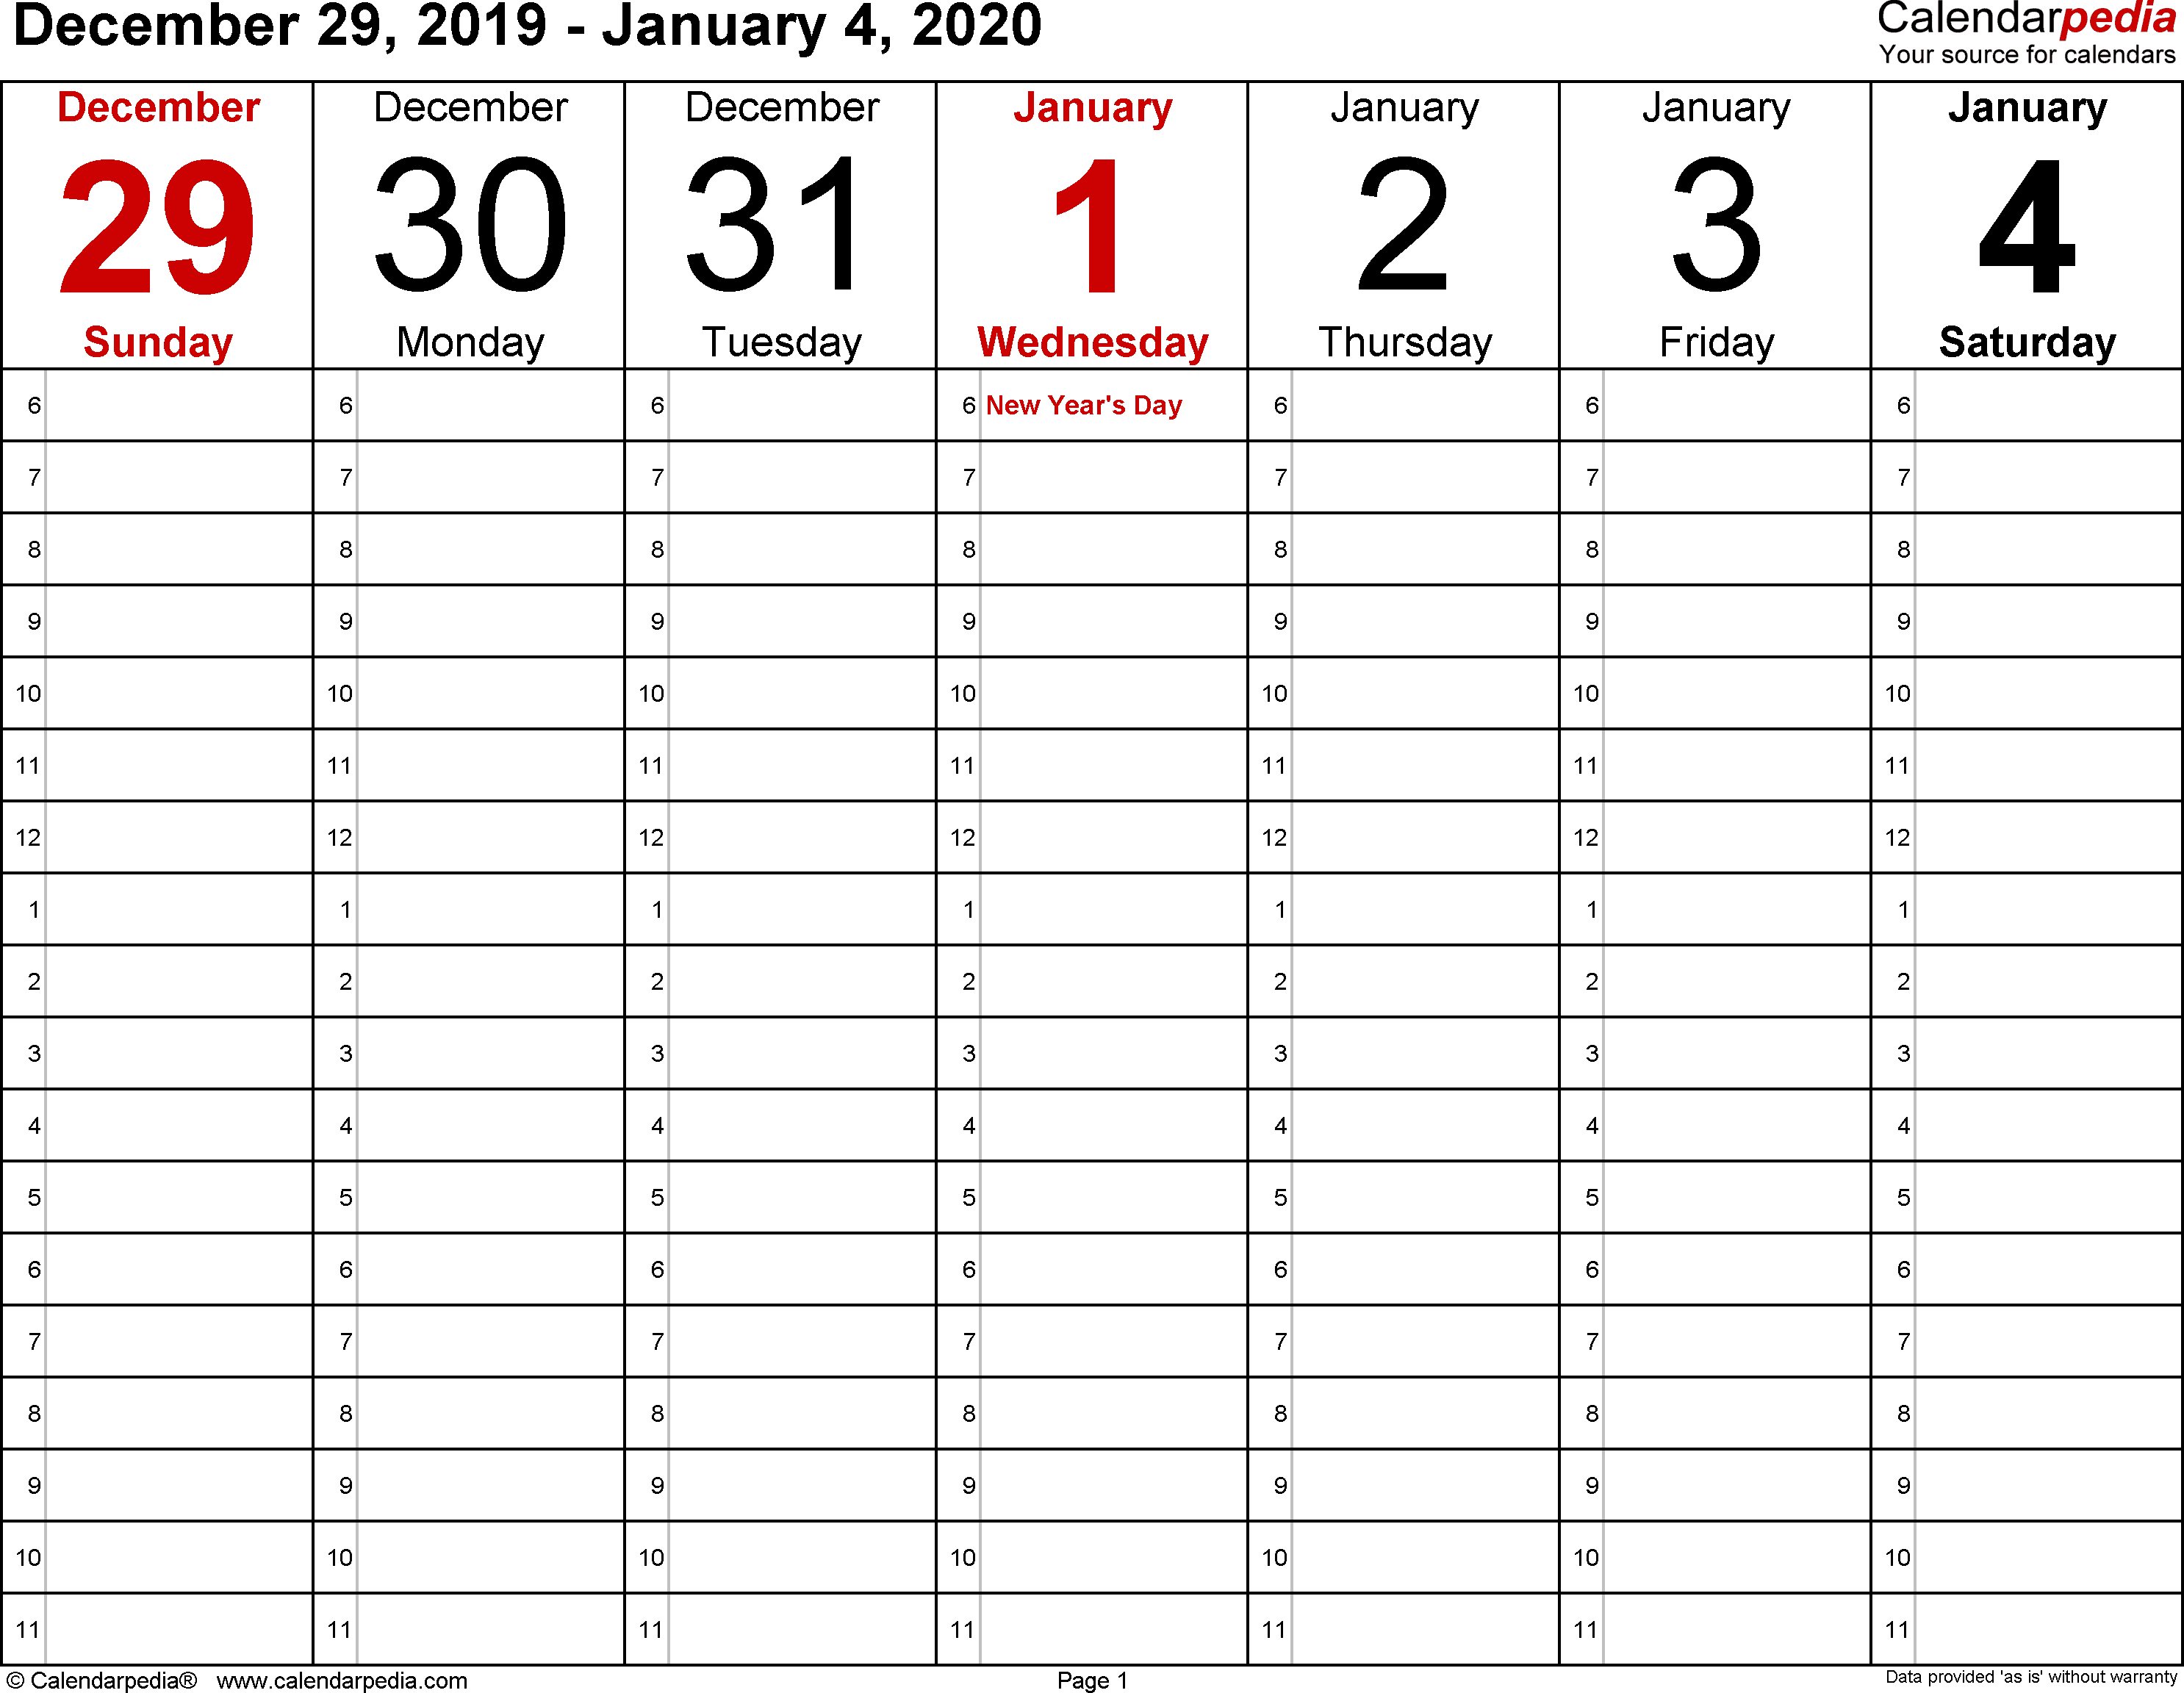 Weekly Calendars 2020 For Word  12 Free Printable Templates pertaining to Calendar Kosong 2020